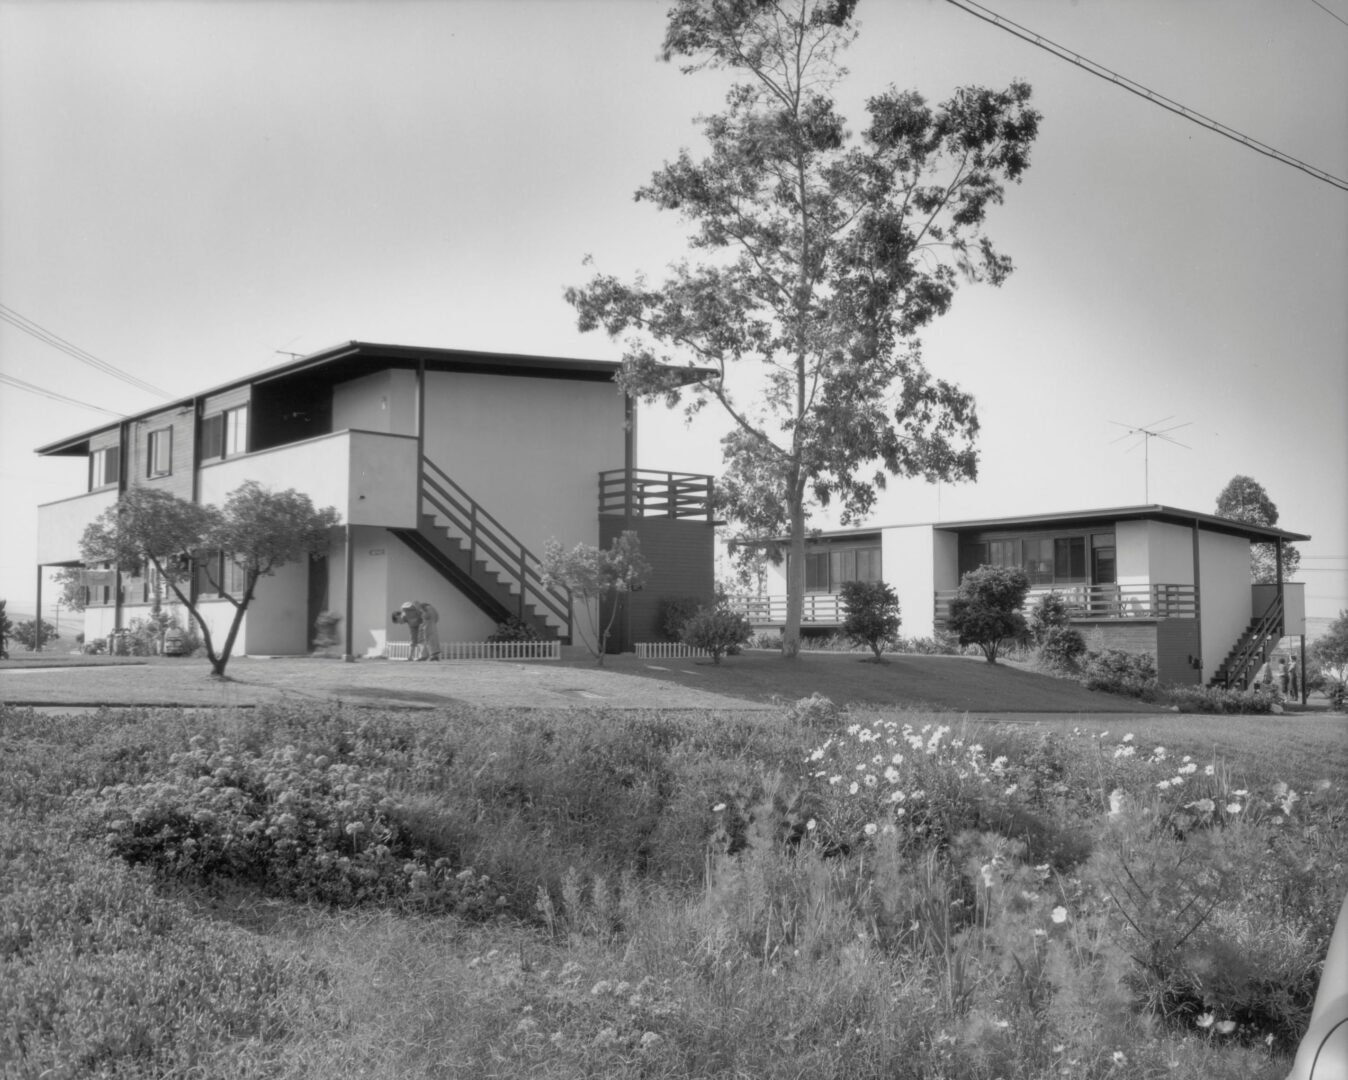 Channel Heights, a public housing project designed by the famous architect Richard Neutra. The project was sold off and later demolished after World War II.